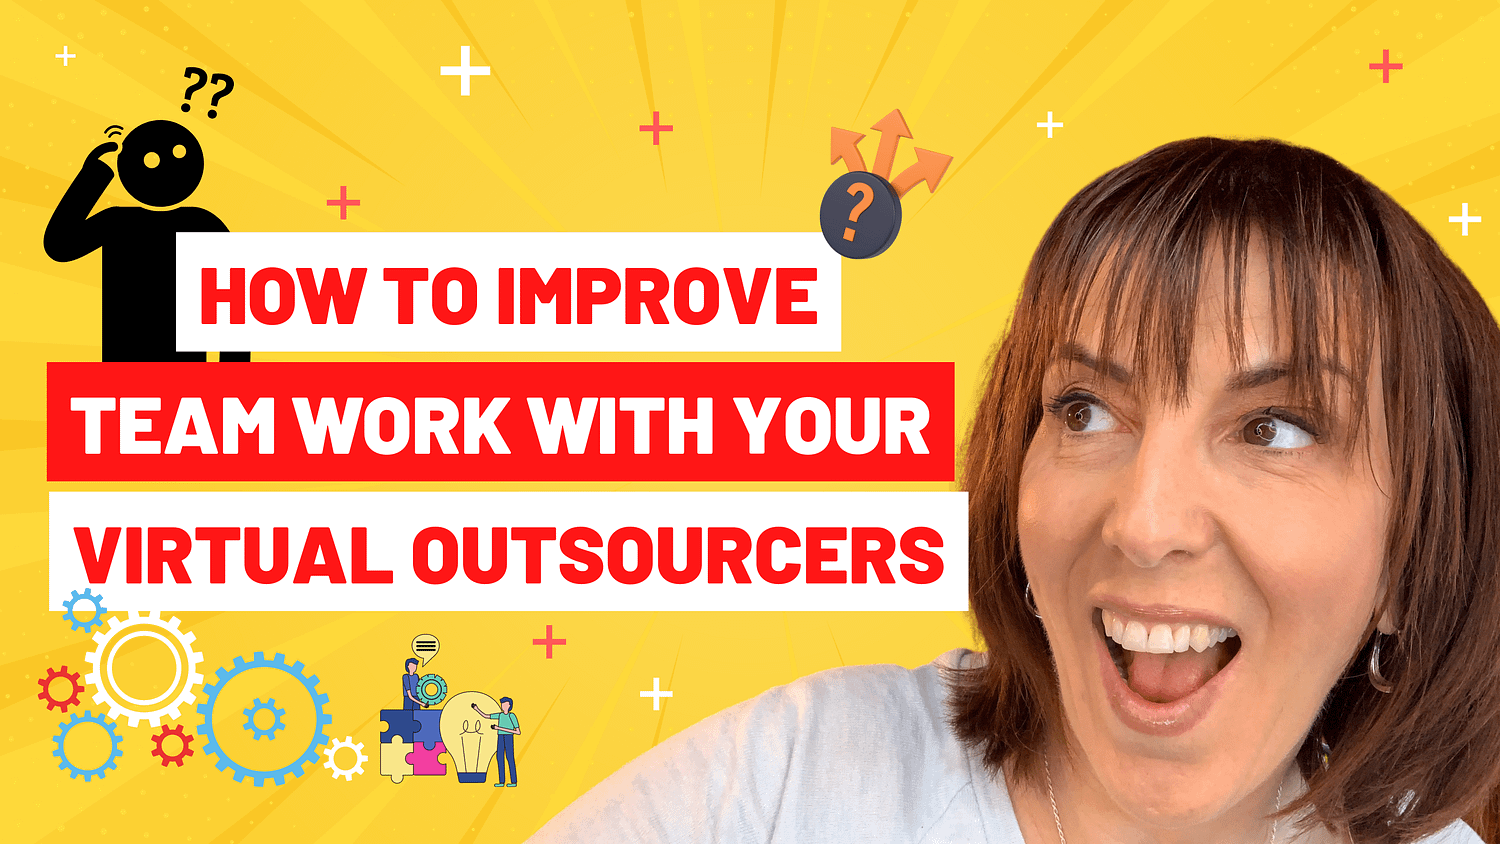 How To Improve Team Work With Your Virtual Outsourcers